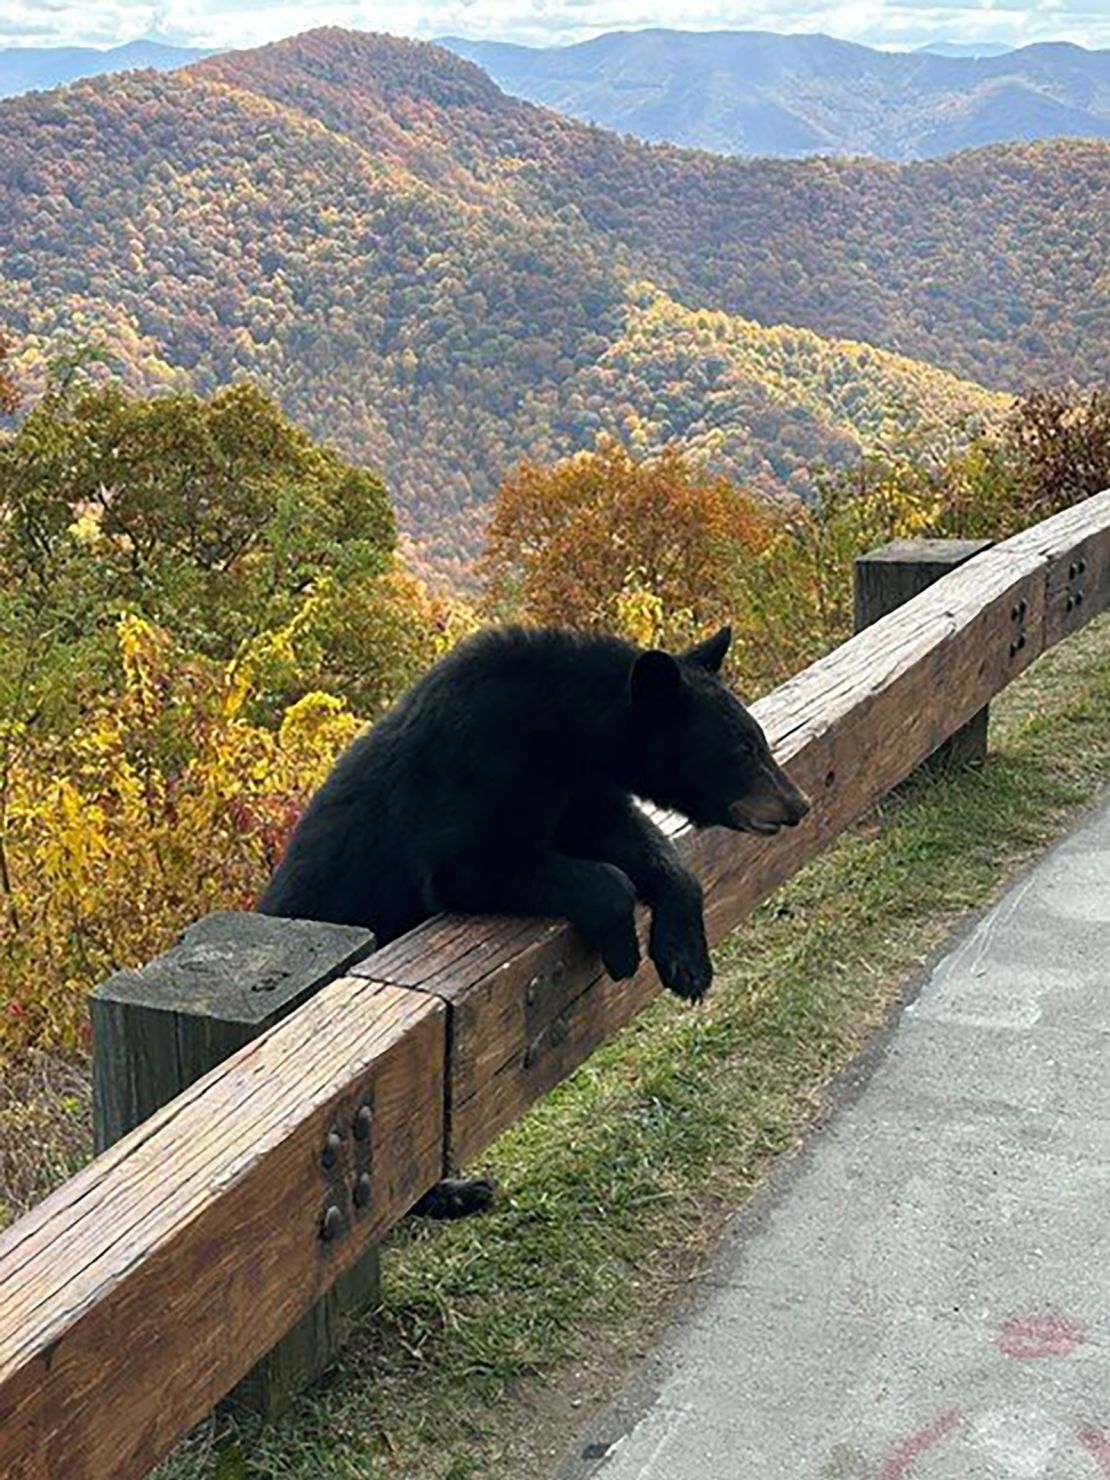 Motorcyclist Jeff Guffey took this photo of a black bear at an overlook along the parkway last week.